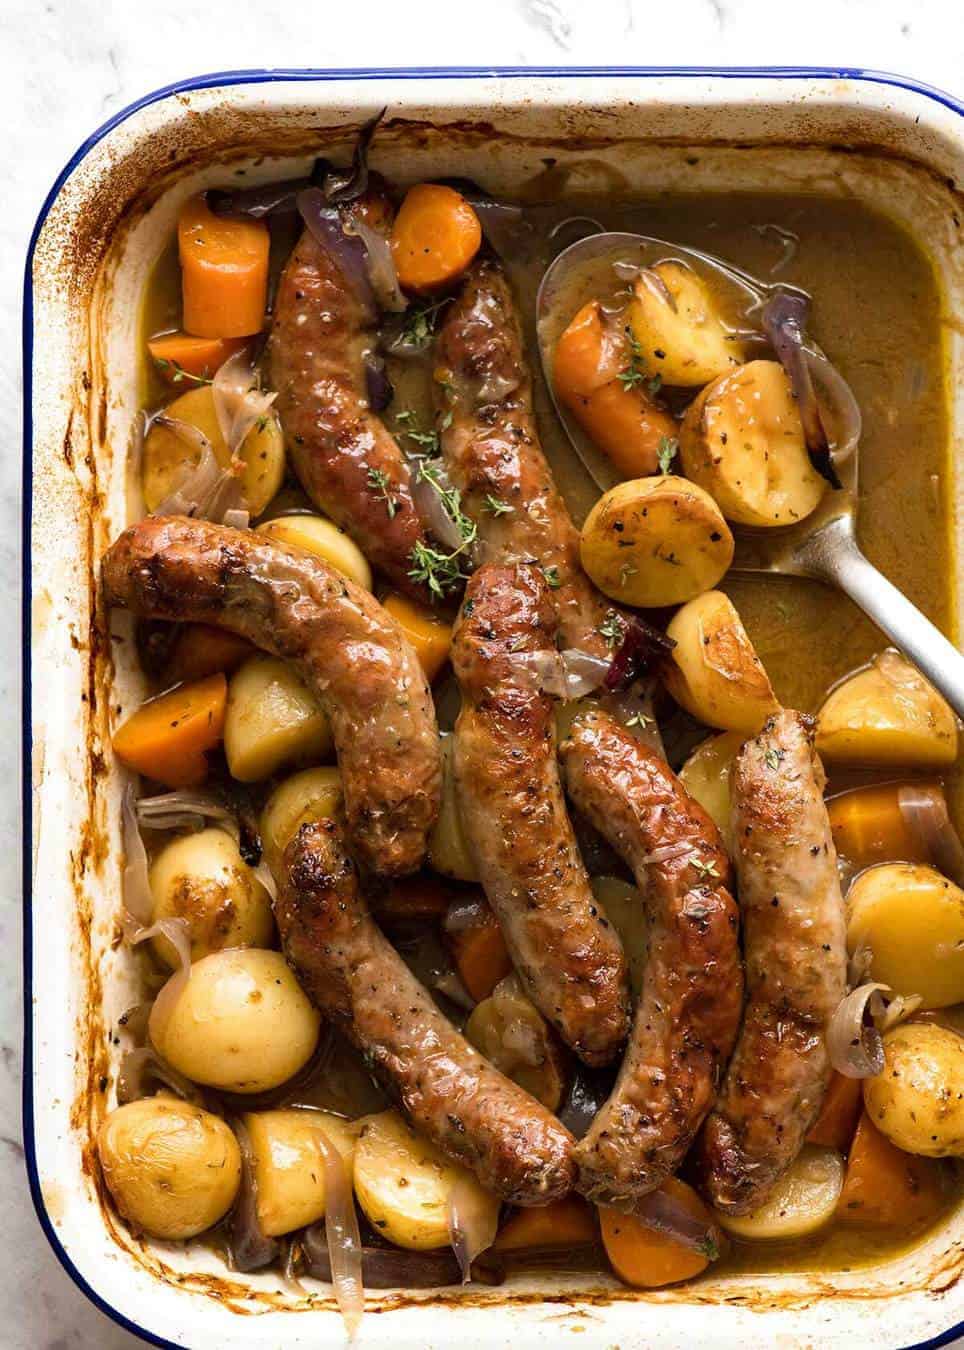 A Sausage Bake and Vegetables WITH Gravy, all made in one pan! Yes, that